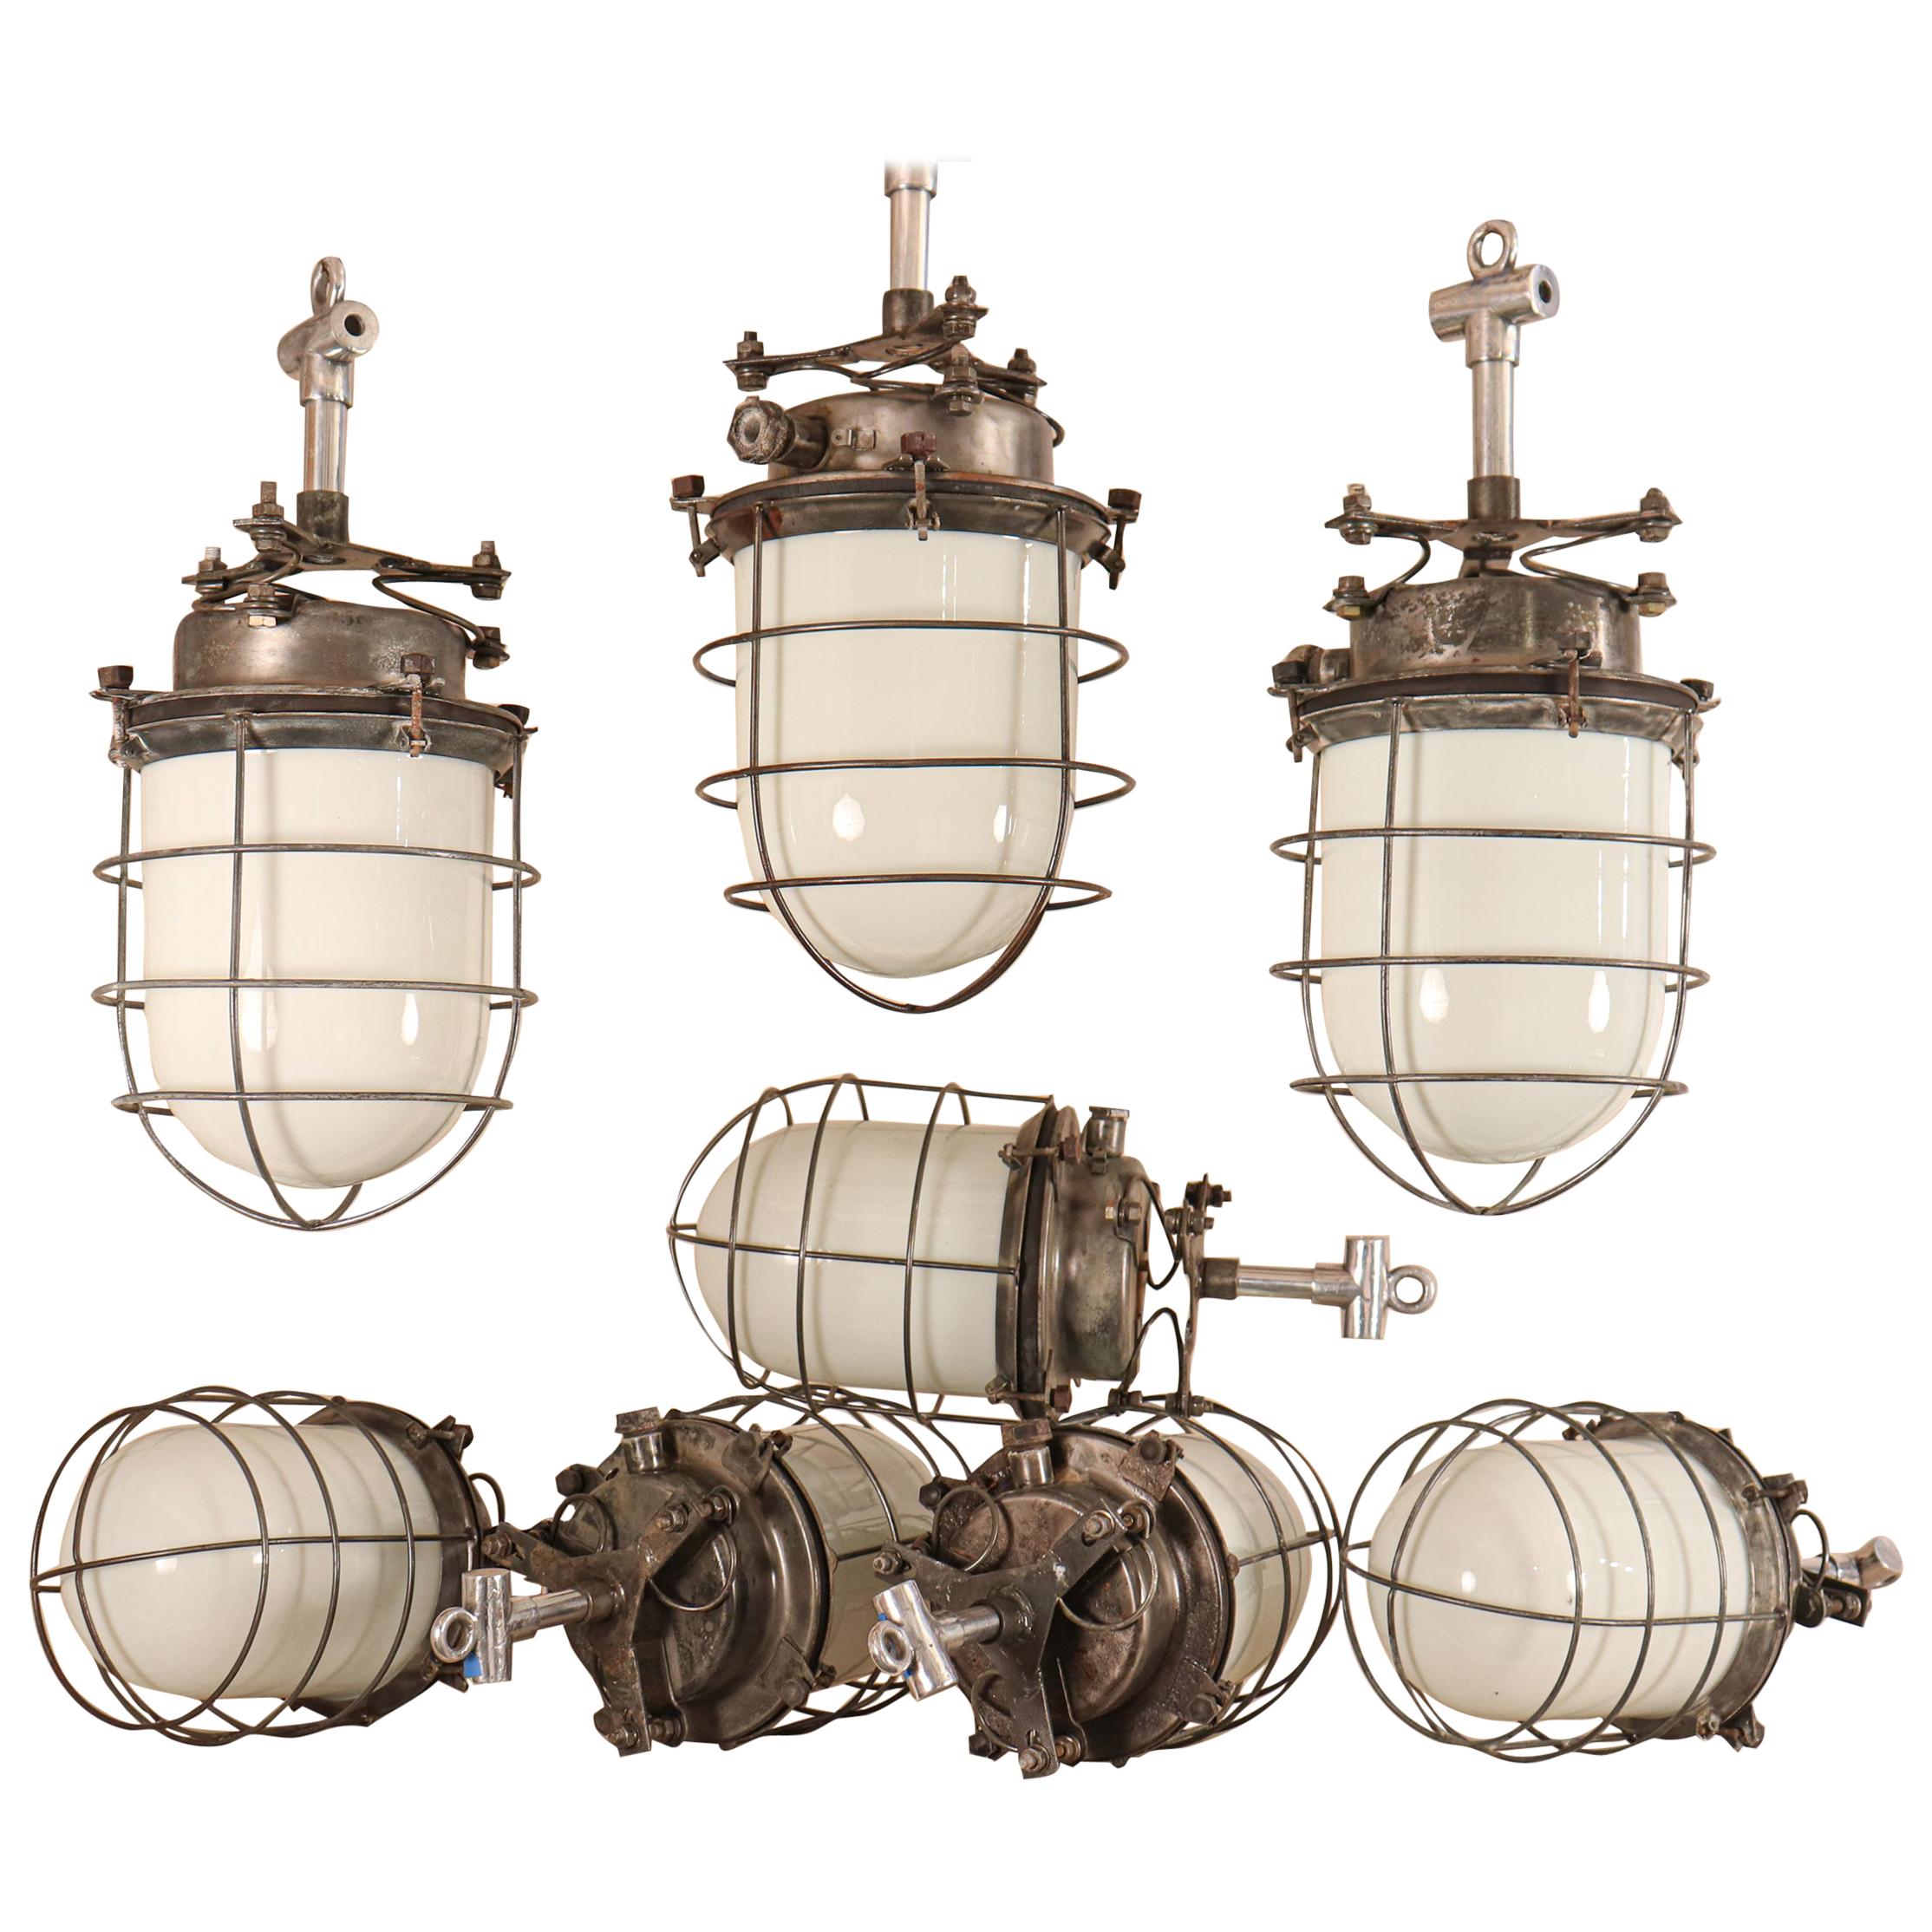  Industrial Milk Glass and Steel Caged Ship's Galley Lights